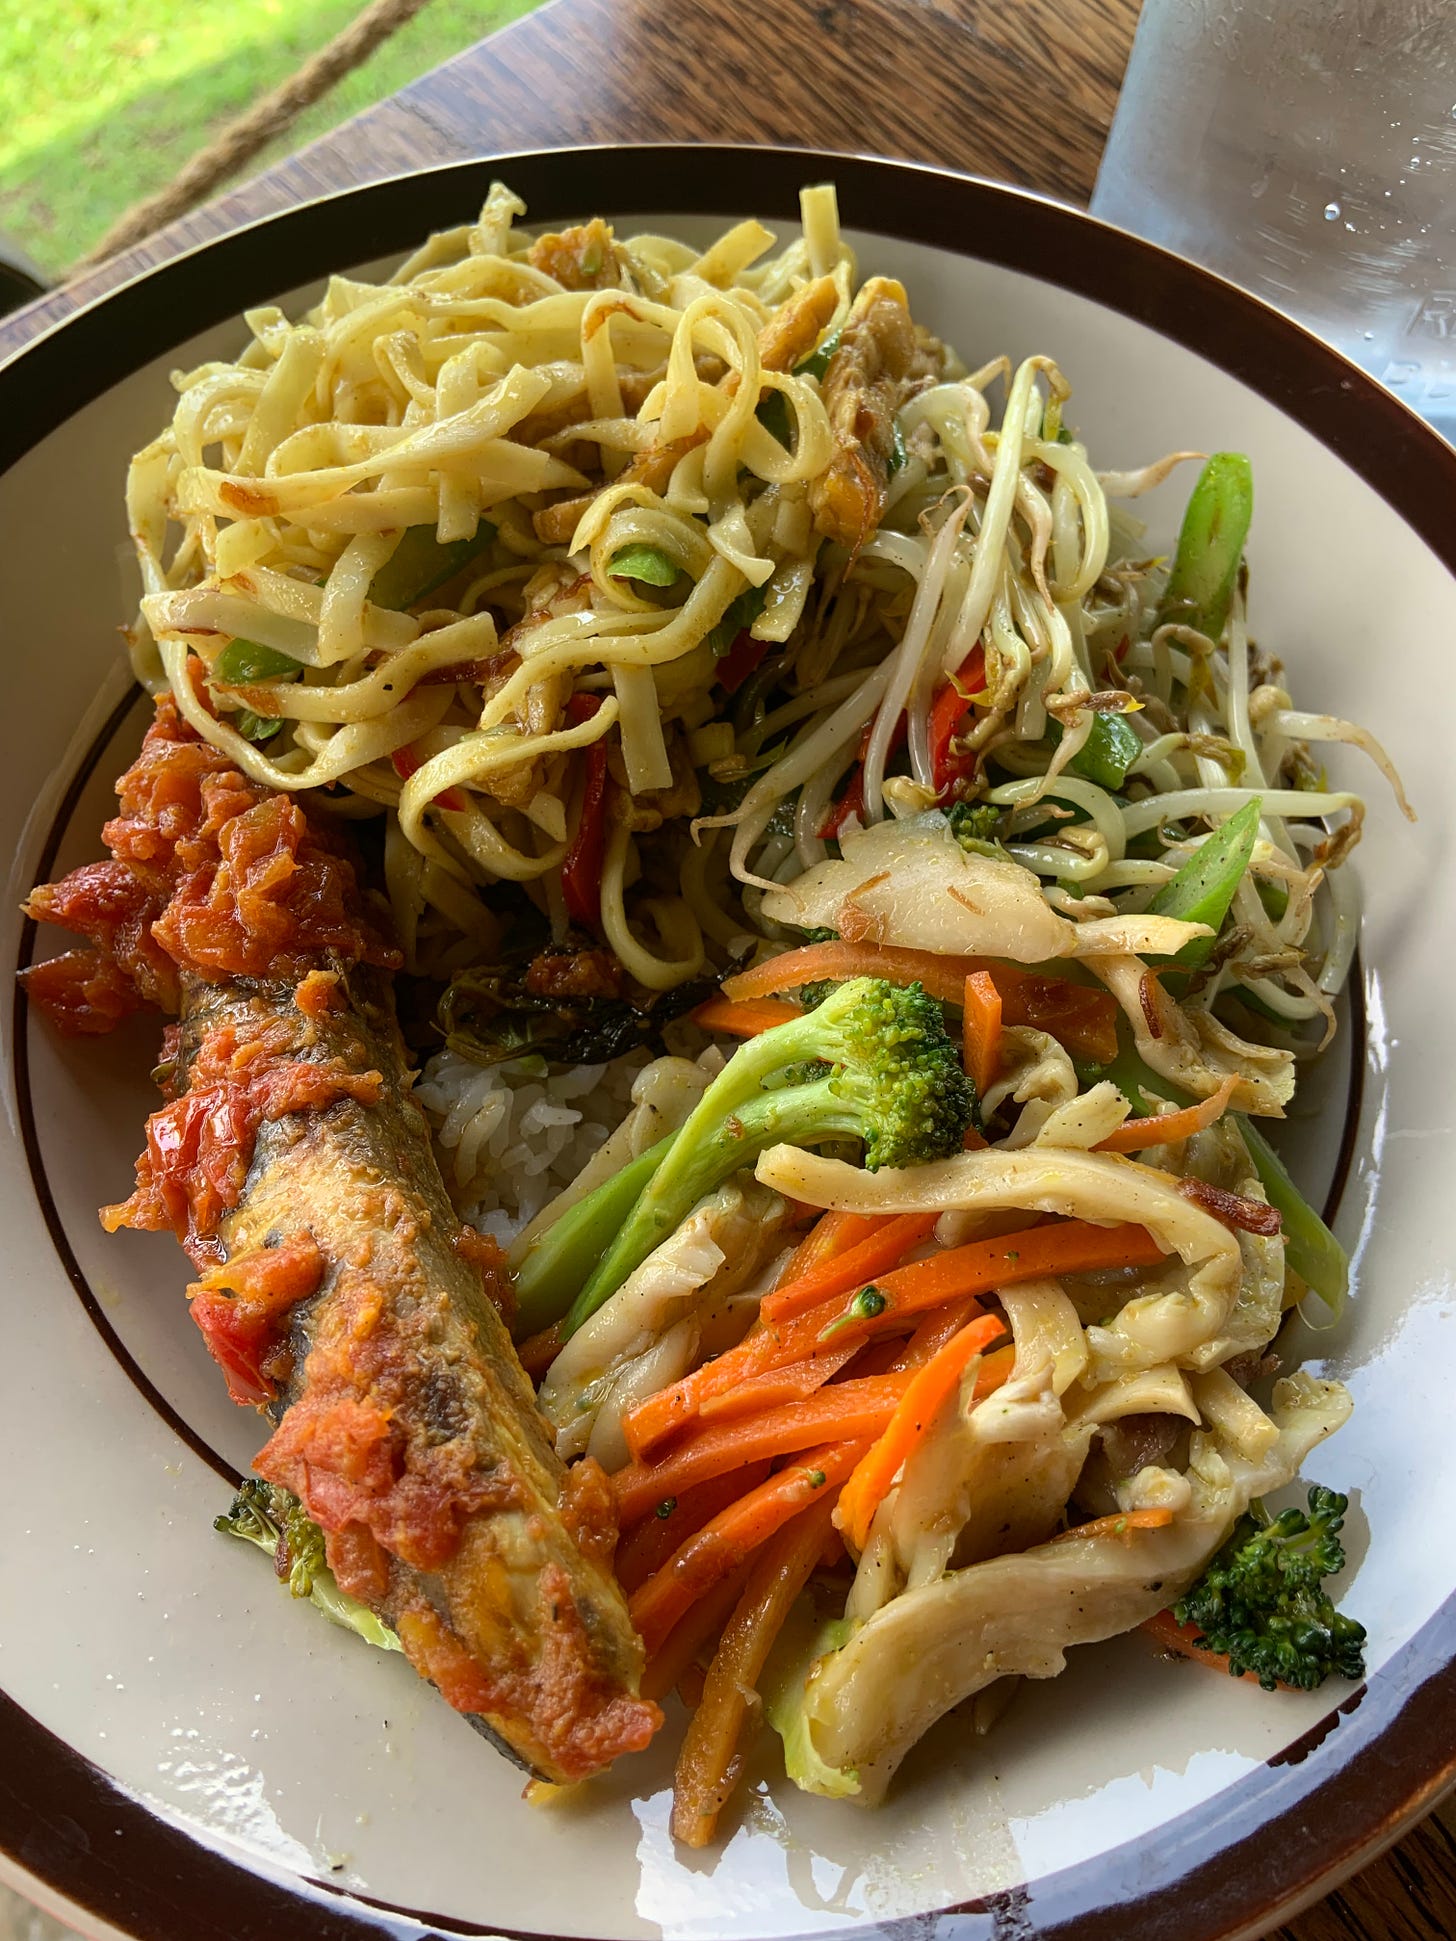 A classic Balinese lunch served in a white and brow bowl. Tuna fish covered in tomato sauce, stir fried noodles with brocoli, carrots, and sprouts.